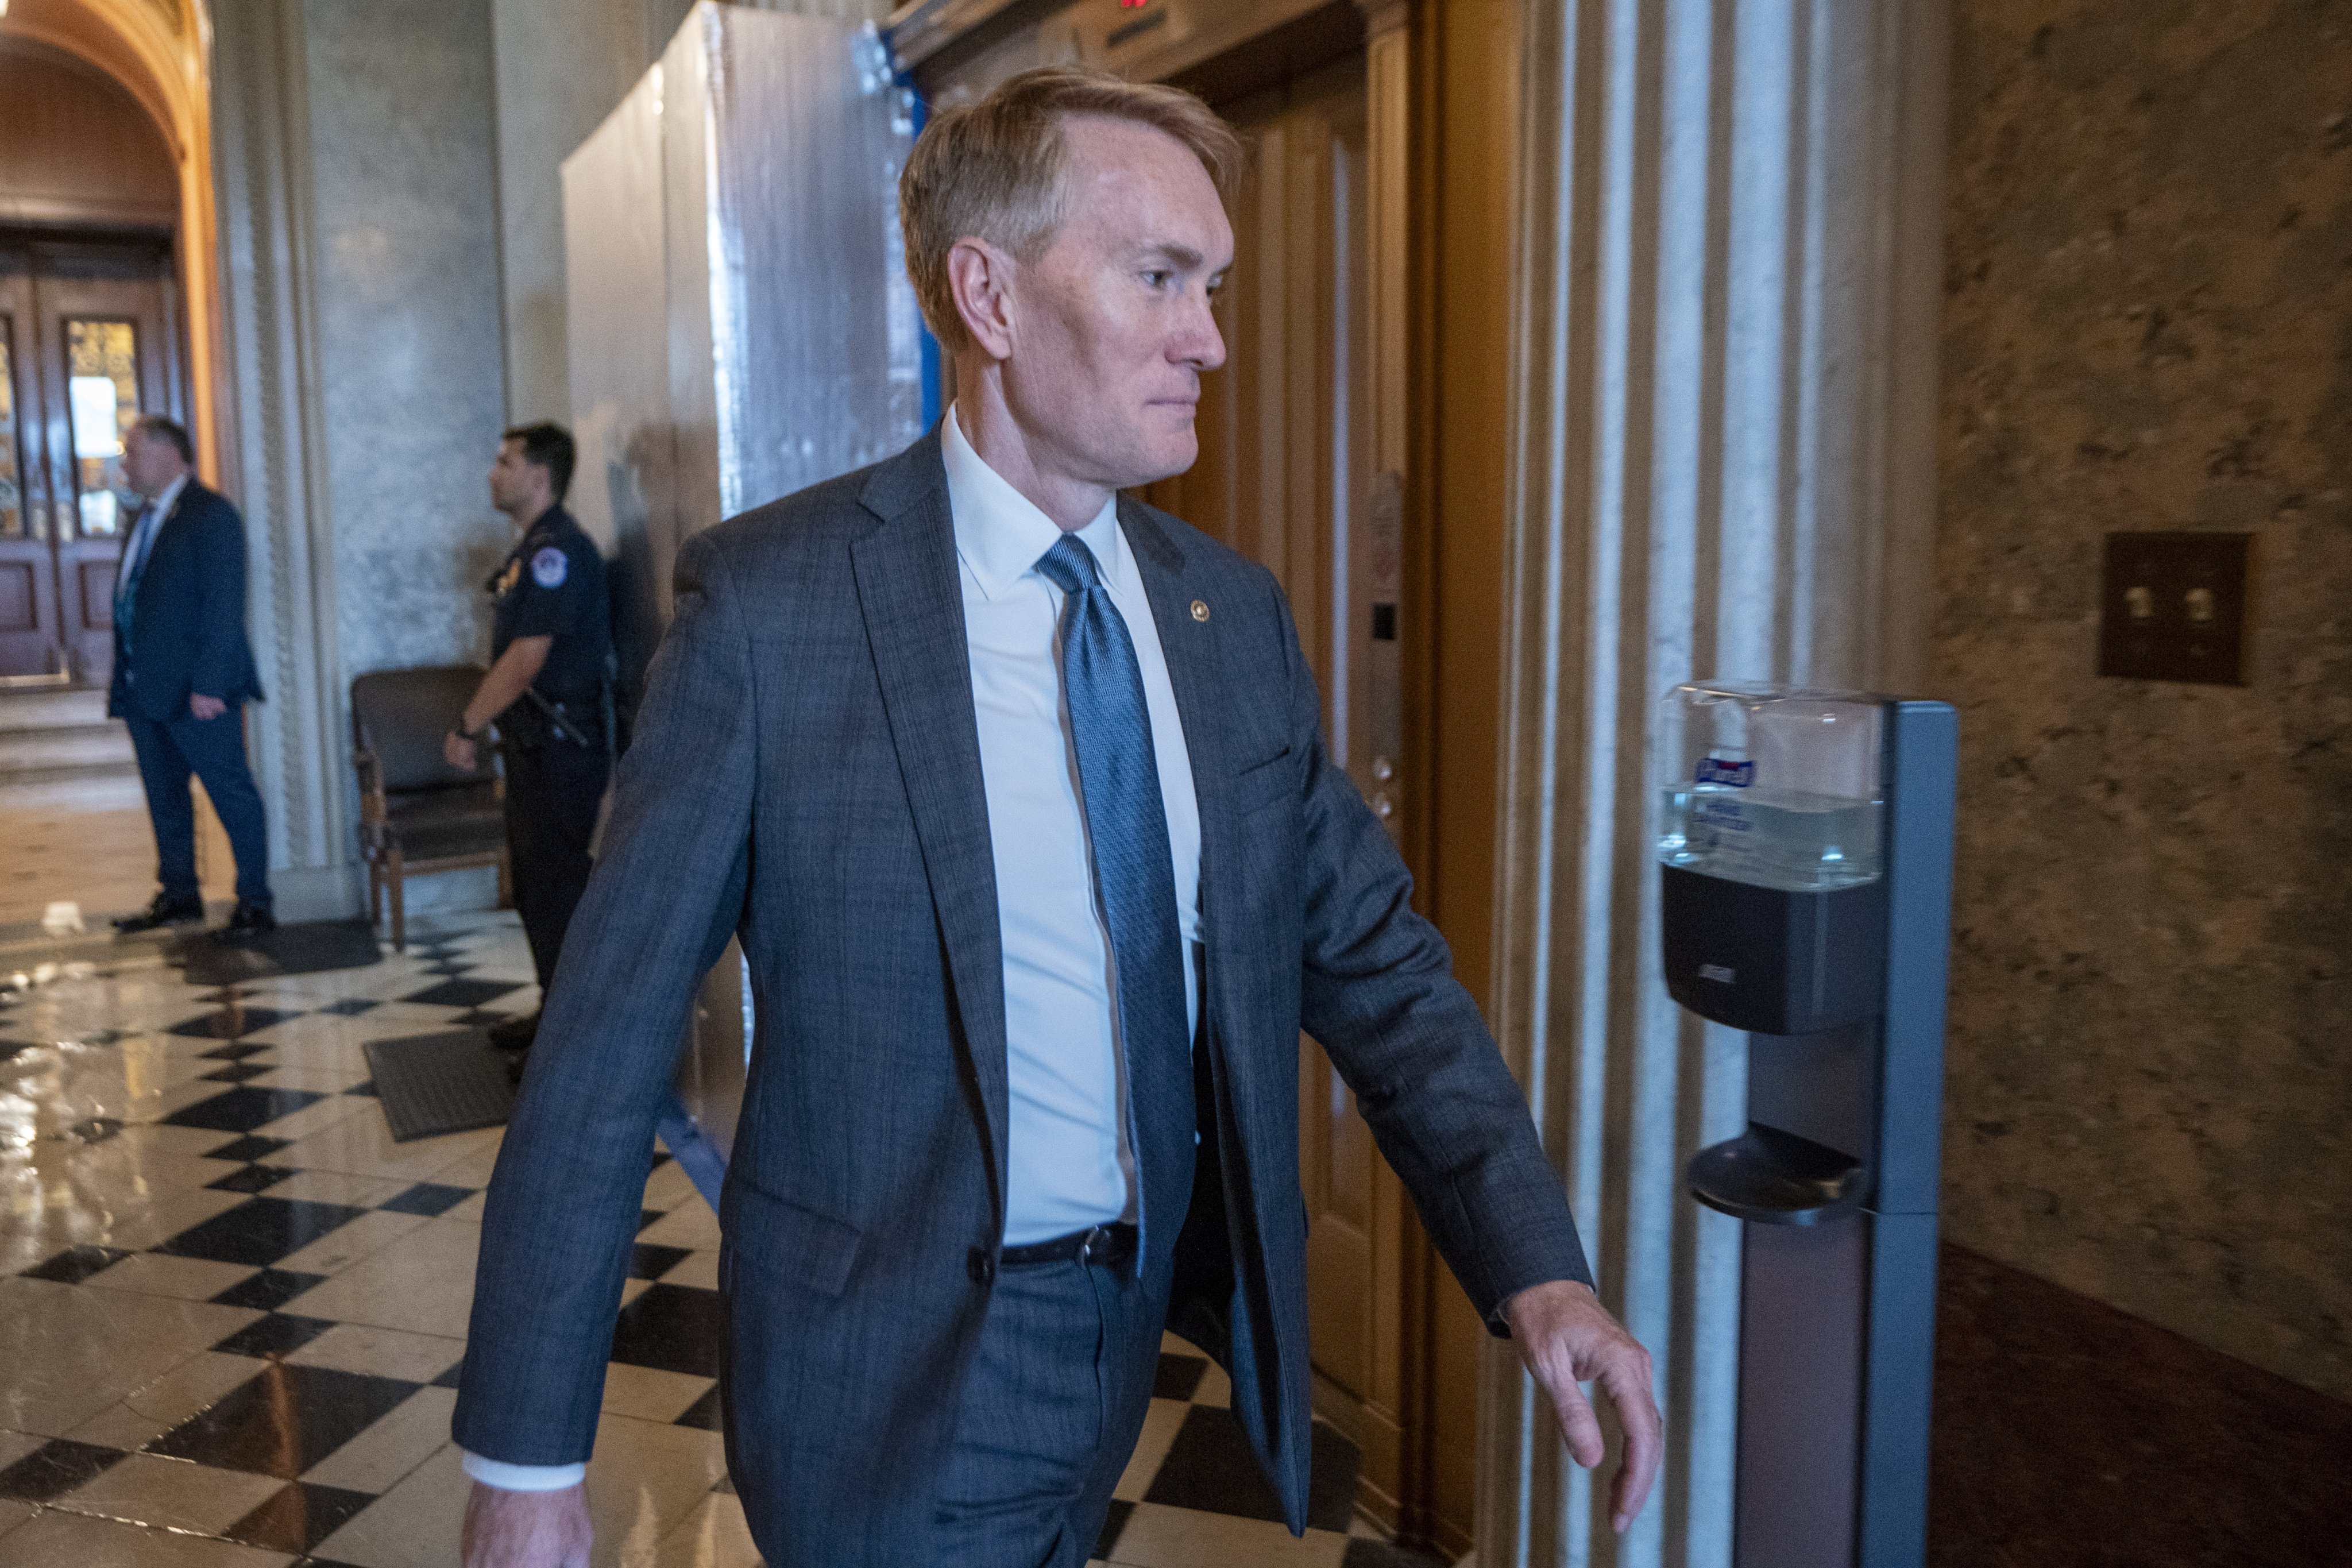 US senator James Lankford, an Oklahoma Republican, walks from the Senate floor following a vote in the US Capitol in Washington last month. Photo: EPA-EFE